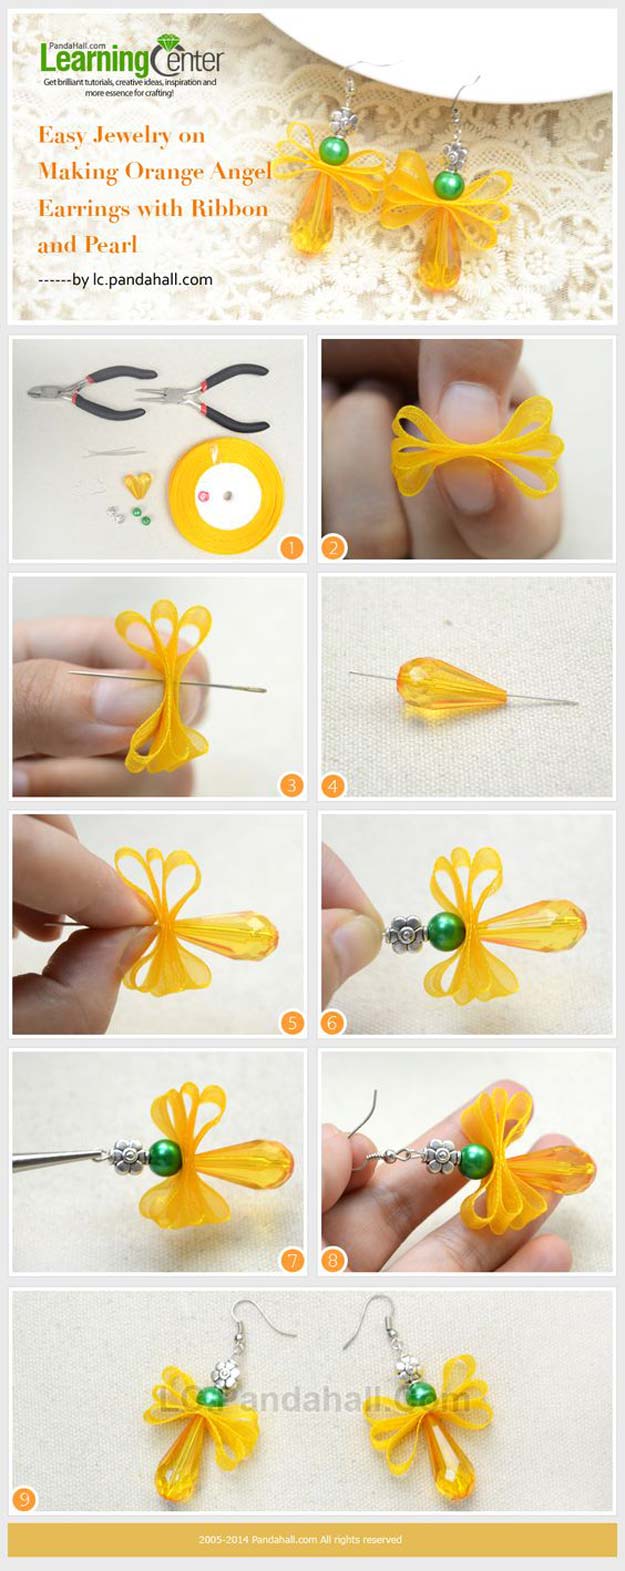 DIY Earrings and Homemade Jewelry Projects - Orange Angel Earrings with Ribbon and Pearl - Easy Studs, Ideas with Beads, Dangle Earring Tutorials, Wire, Feather, Simple Boho, Handmade Earring Cuff, Hoops and Cute Ideas for Teens and Adults #diygifts #diyteens #teengifts #teencrafts #diyearrings